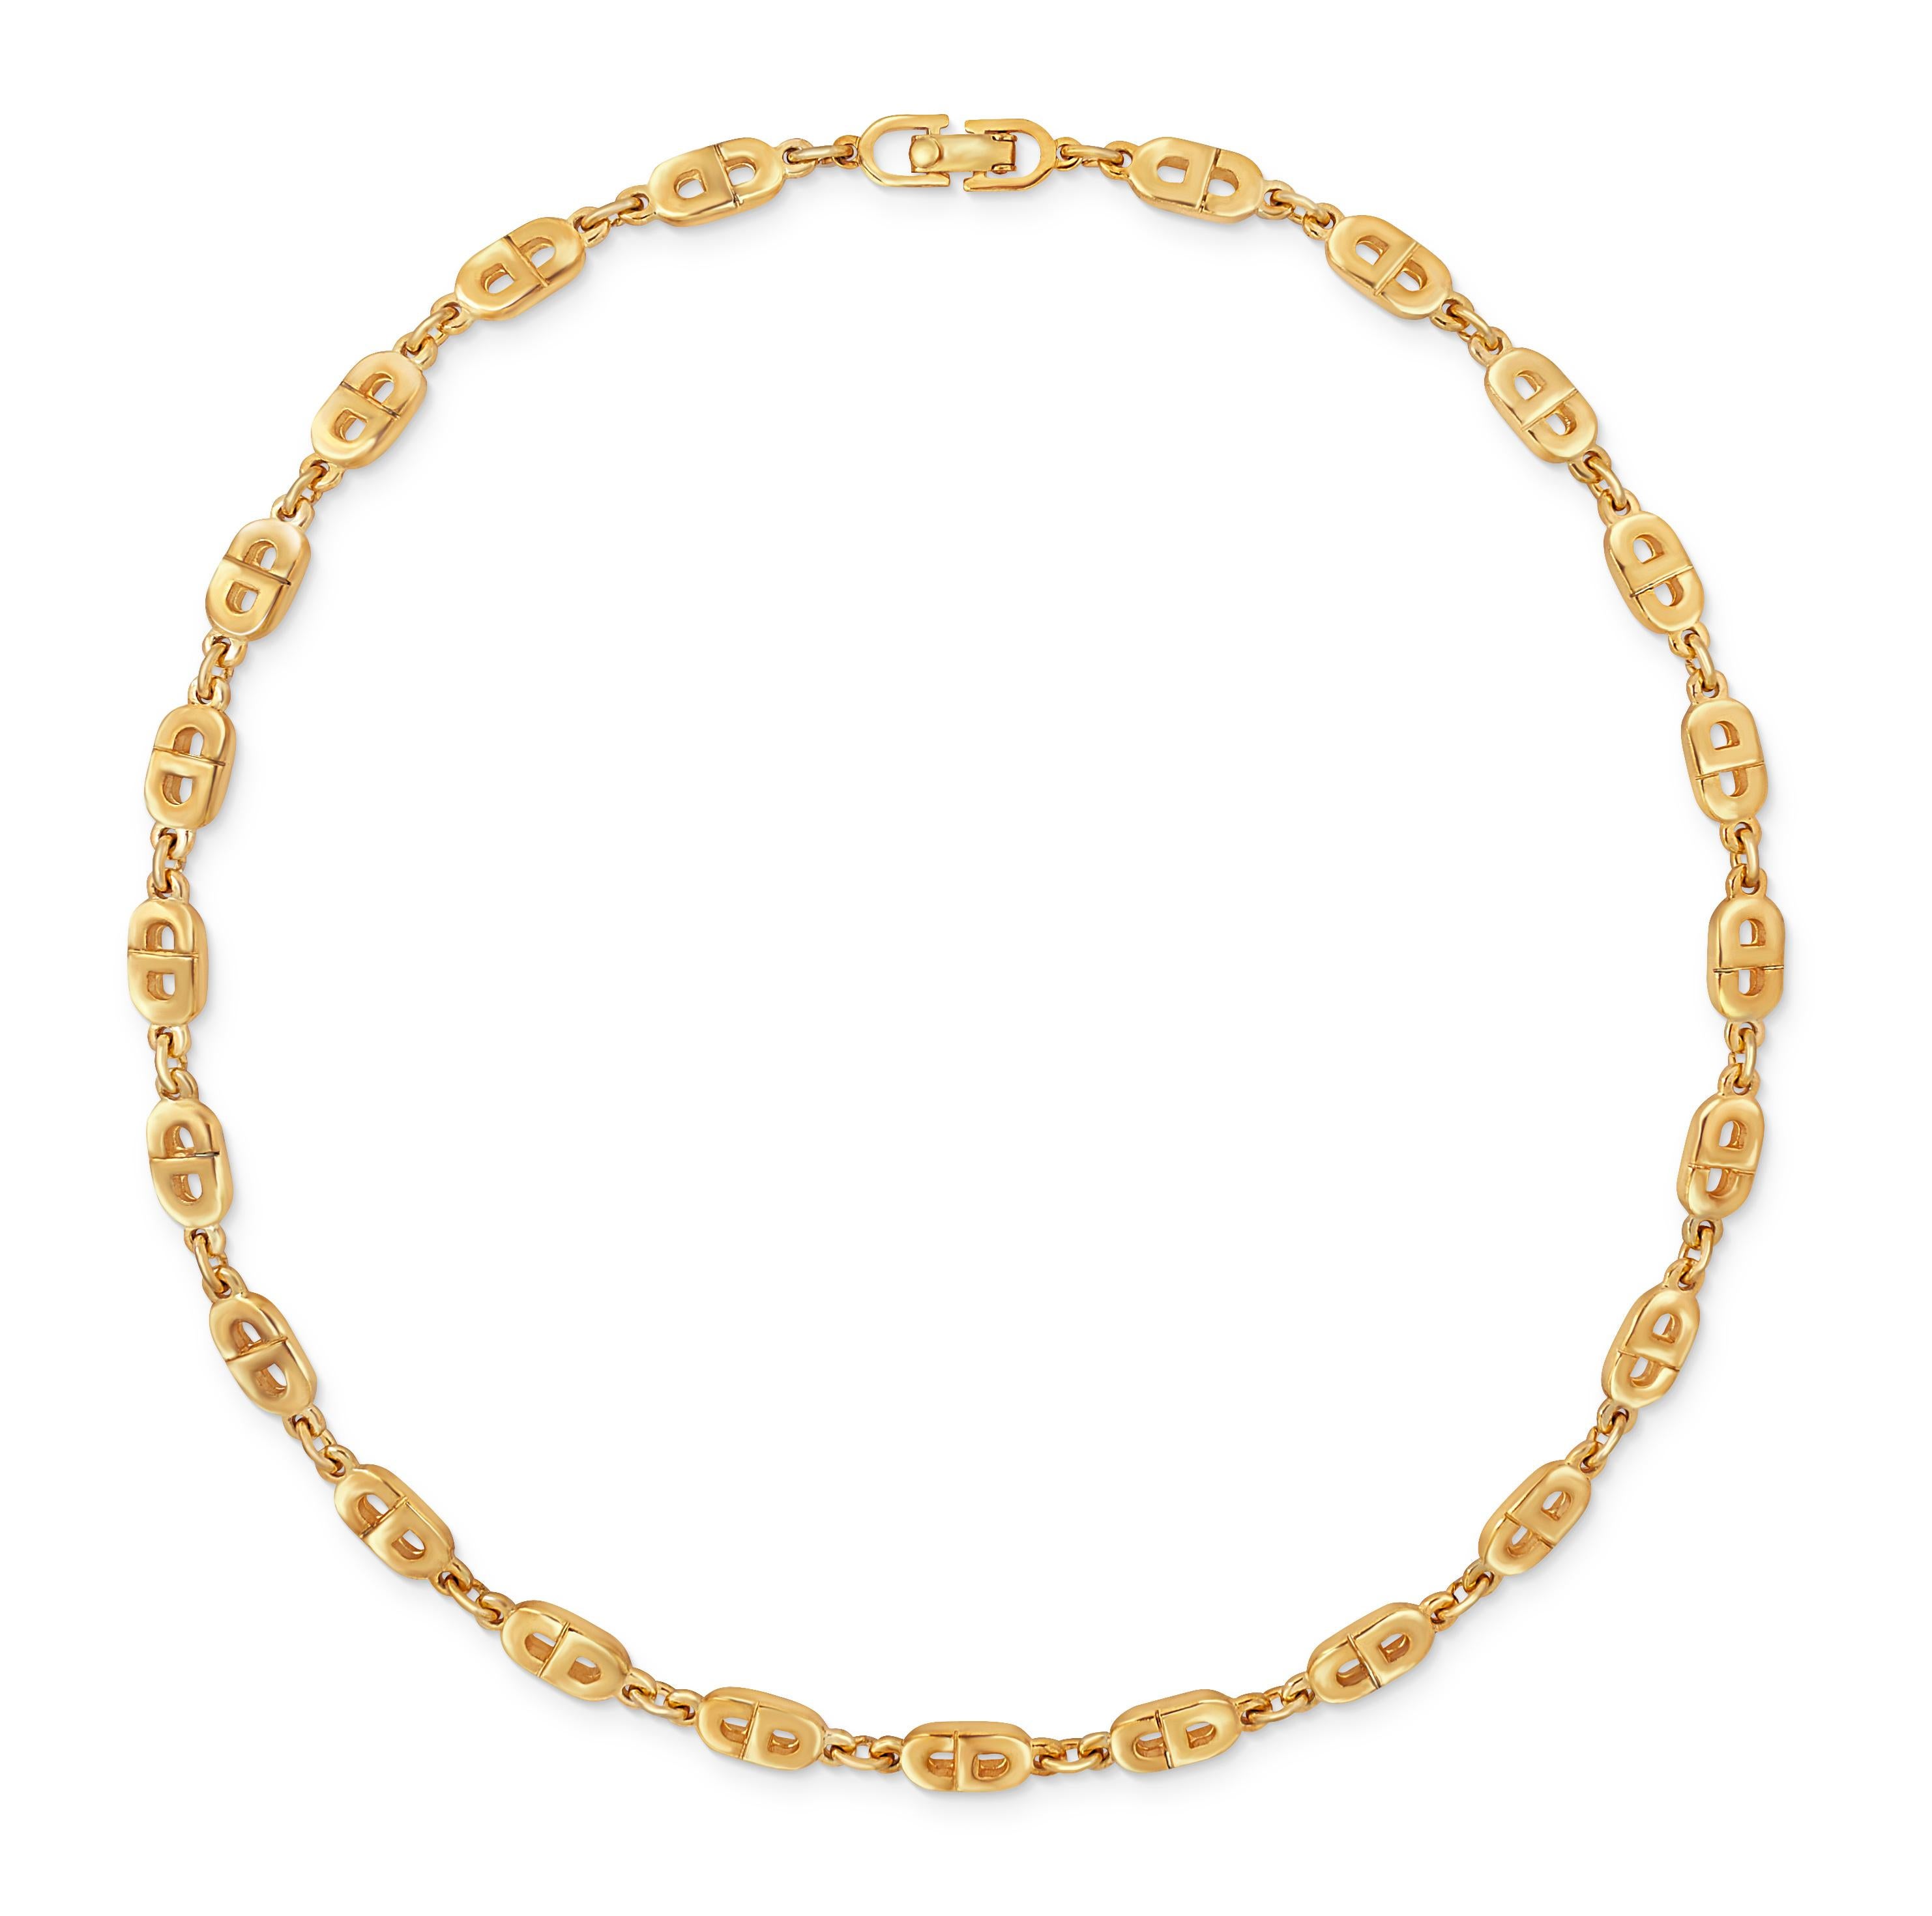 Vintage 1990s Christian Dior CD logo chain choker necklace in gold plate.  This necklace comprises small puffy CD logo links and sits perfectly at choker length.  Length 15.5 inches, width 1/4 inch with a foldover clasp closure.  Very good condition